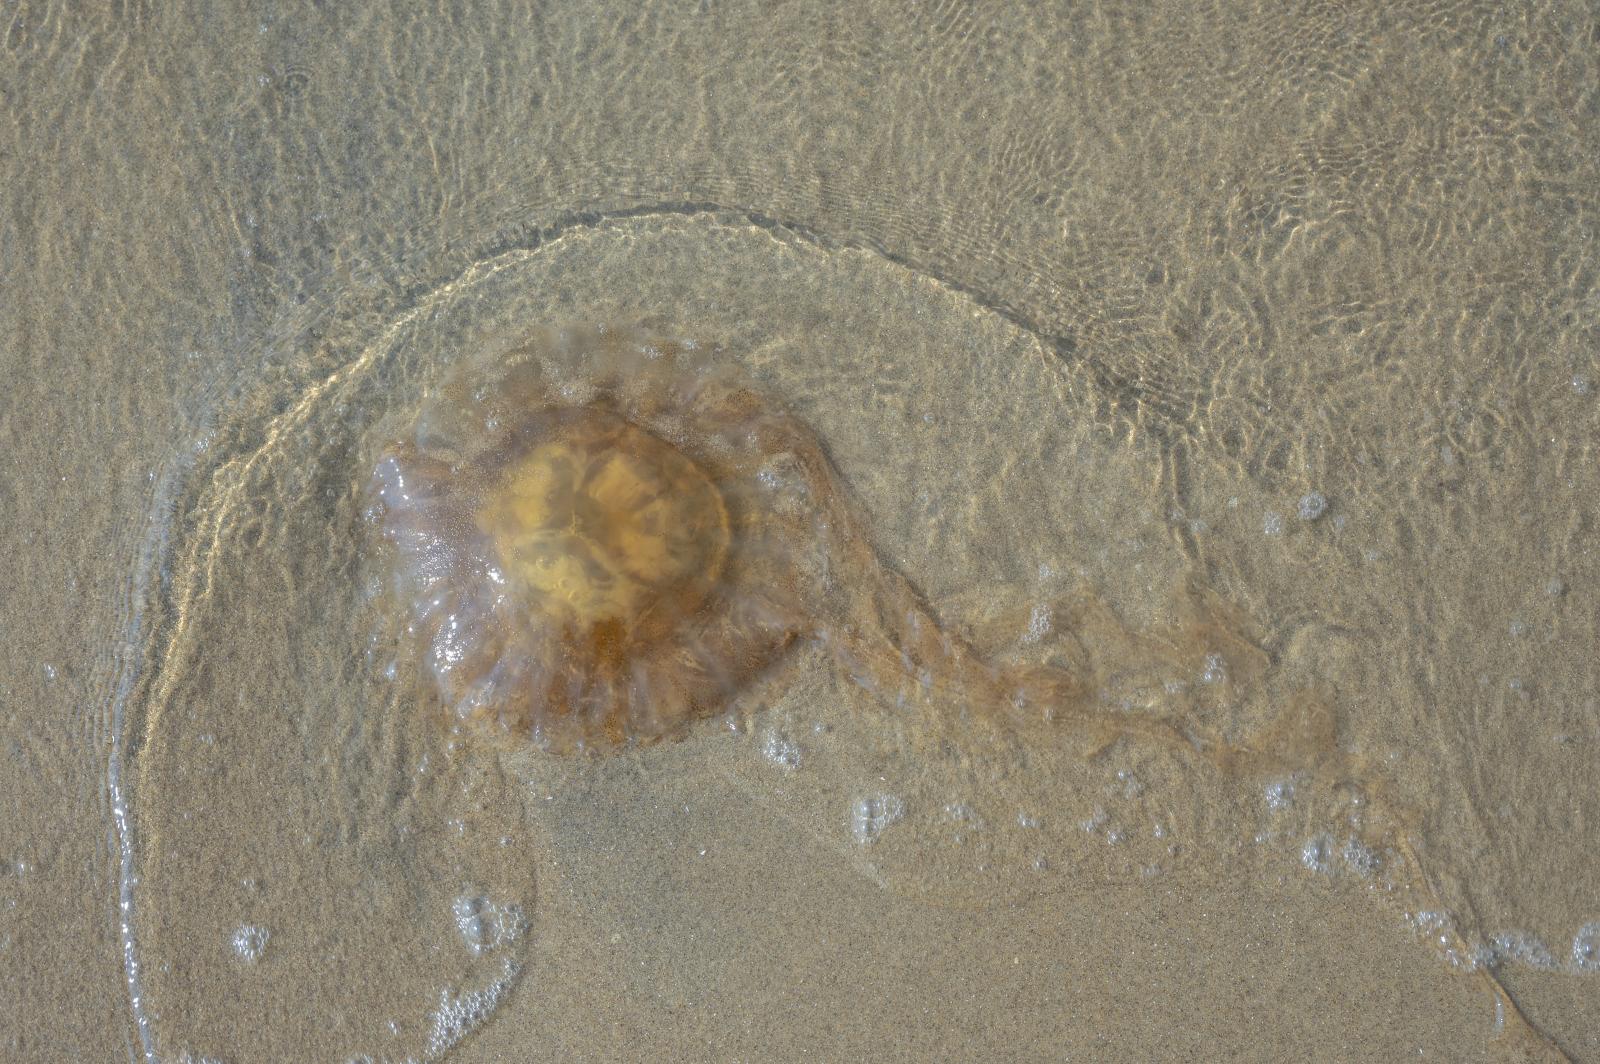 A jellyfish on the beach | Buy this image